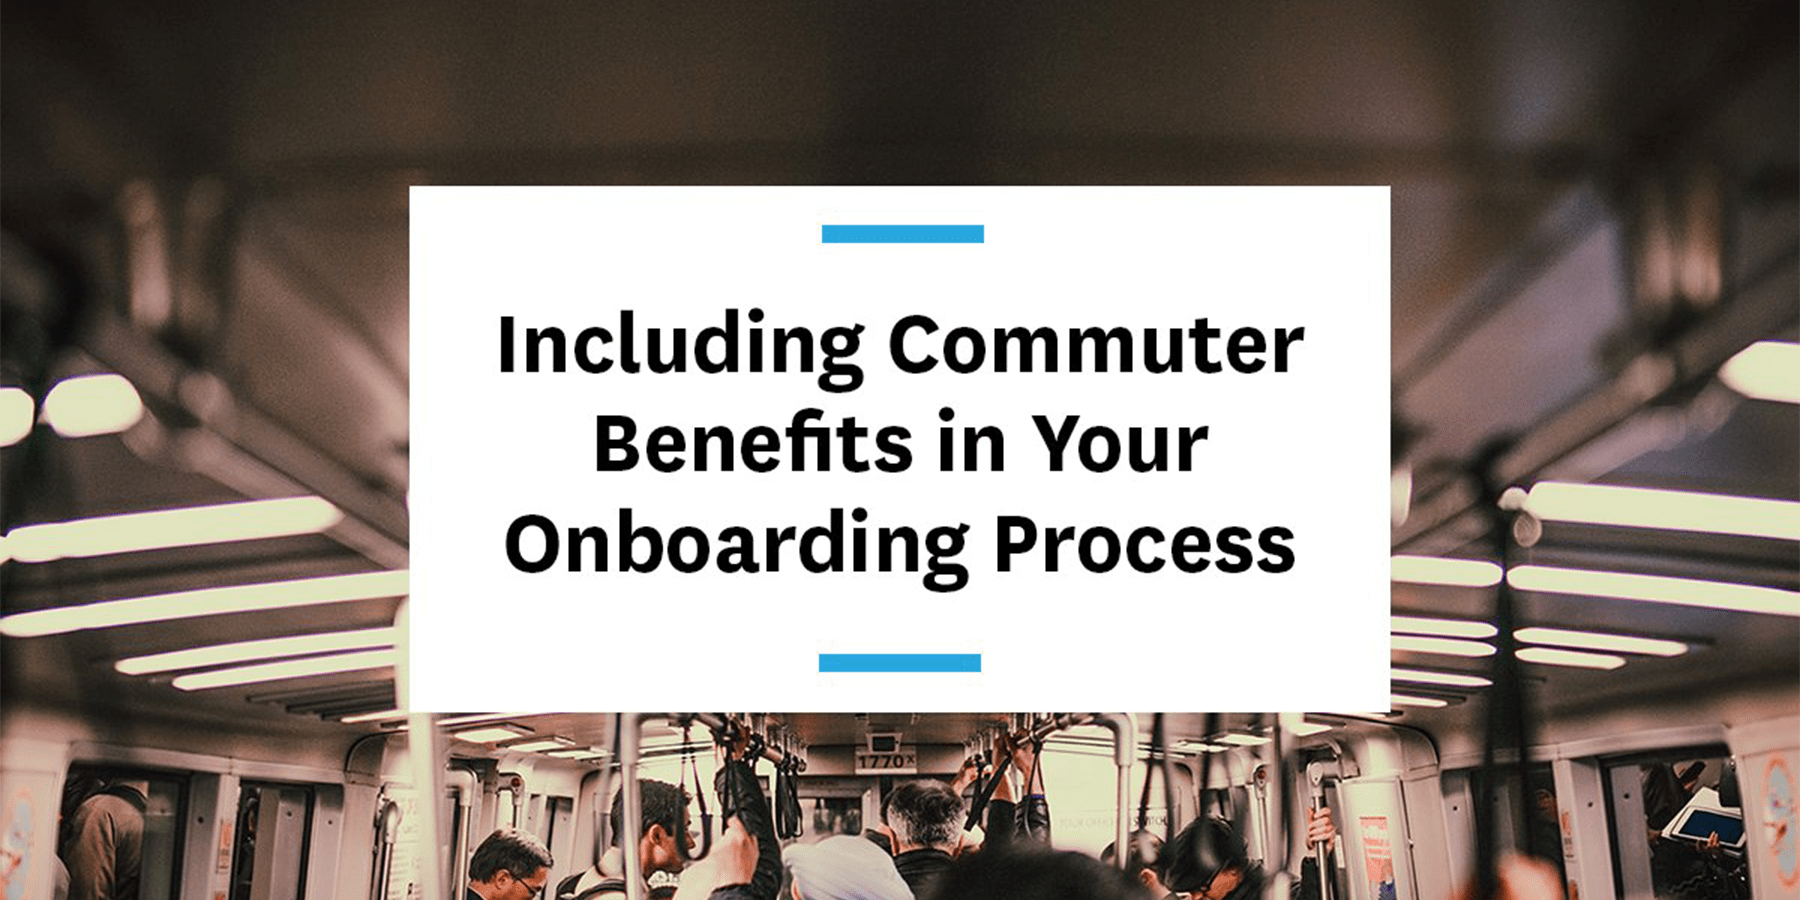 Feature image for including commuter benefits in your onboarding process